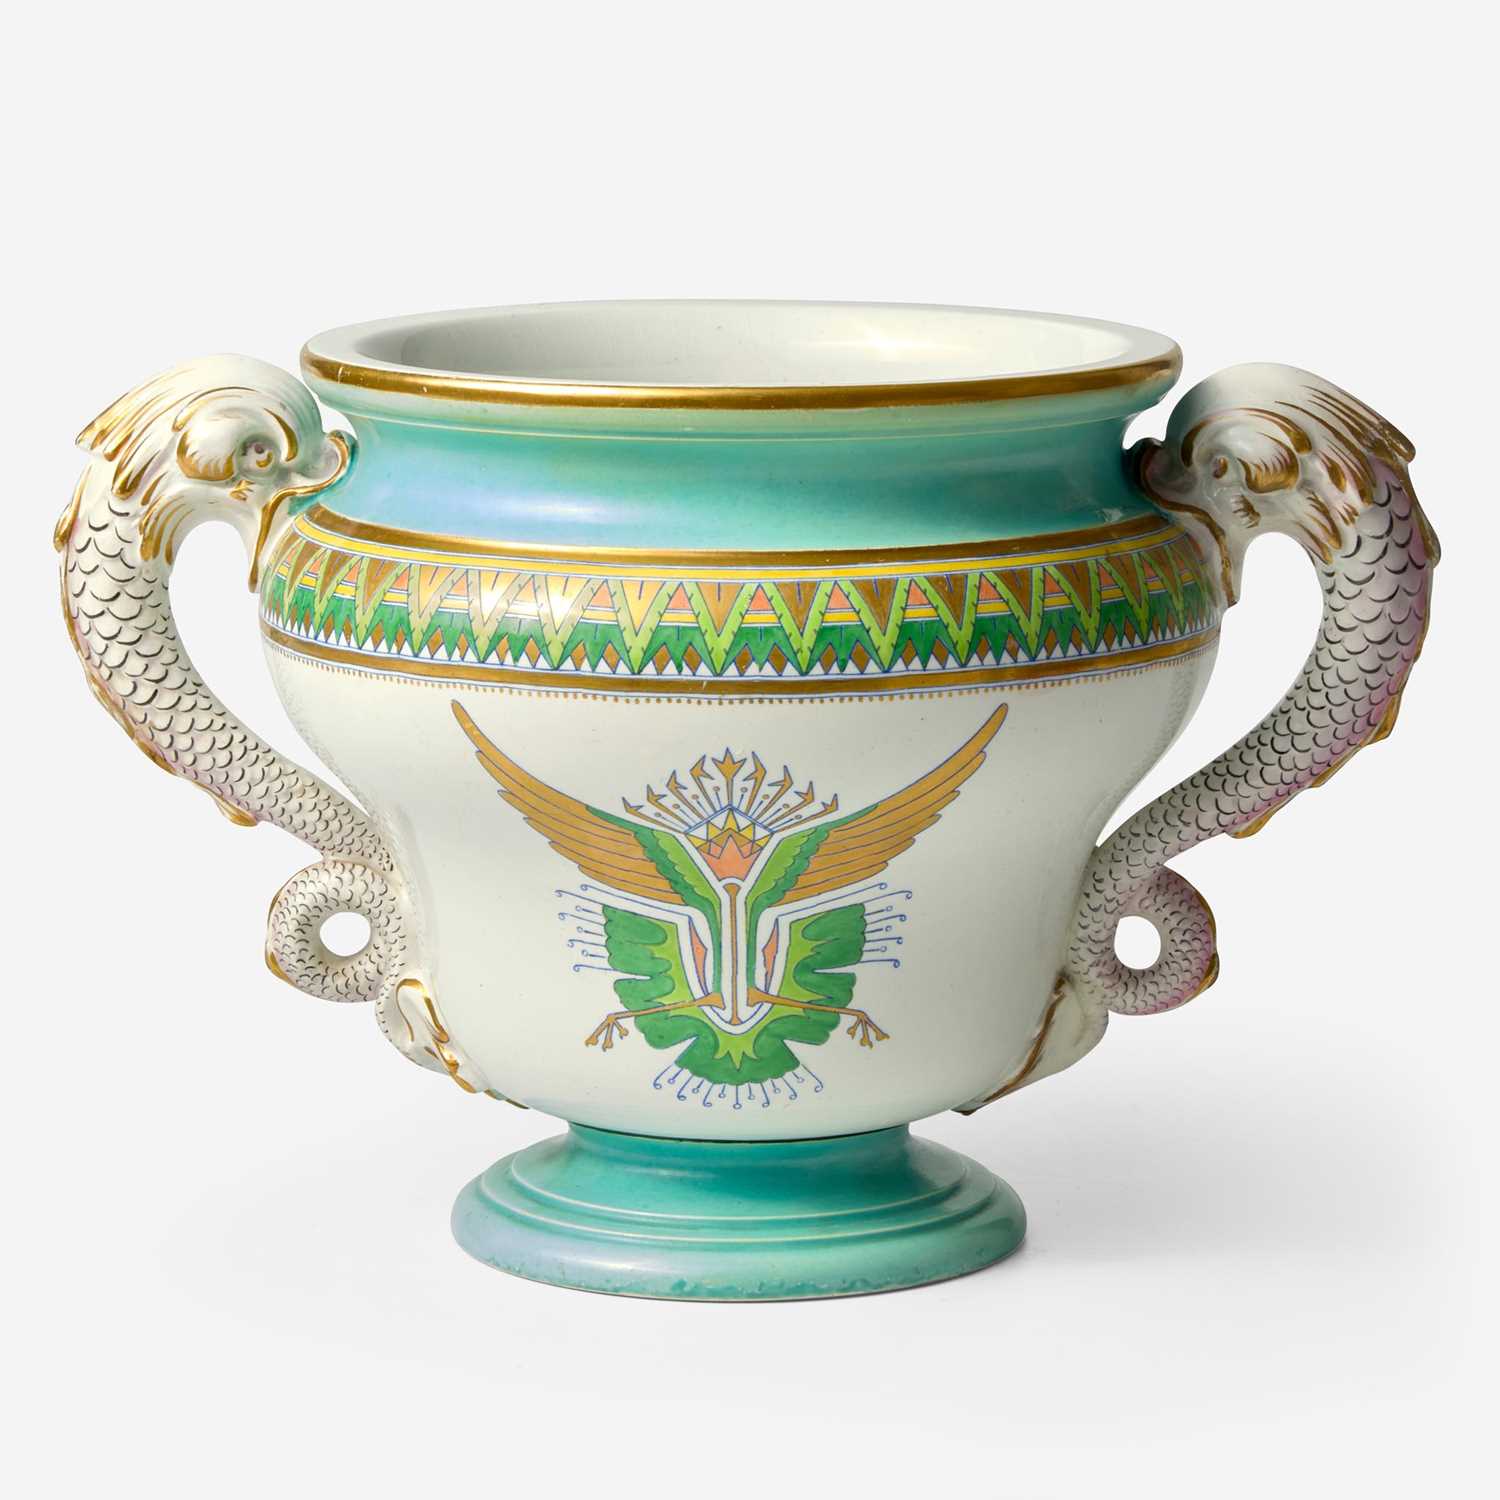 Lot 142 - A Wedgwood Majolica Jardiniere with Christopher Dresser (1834-1904) Designed  Decoration